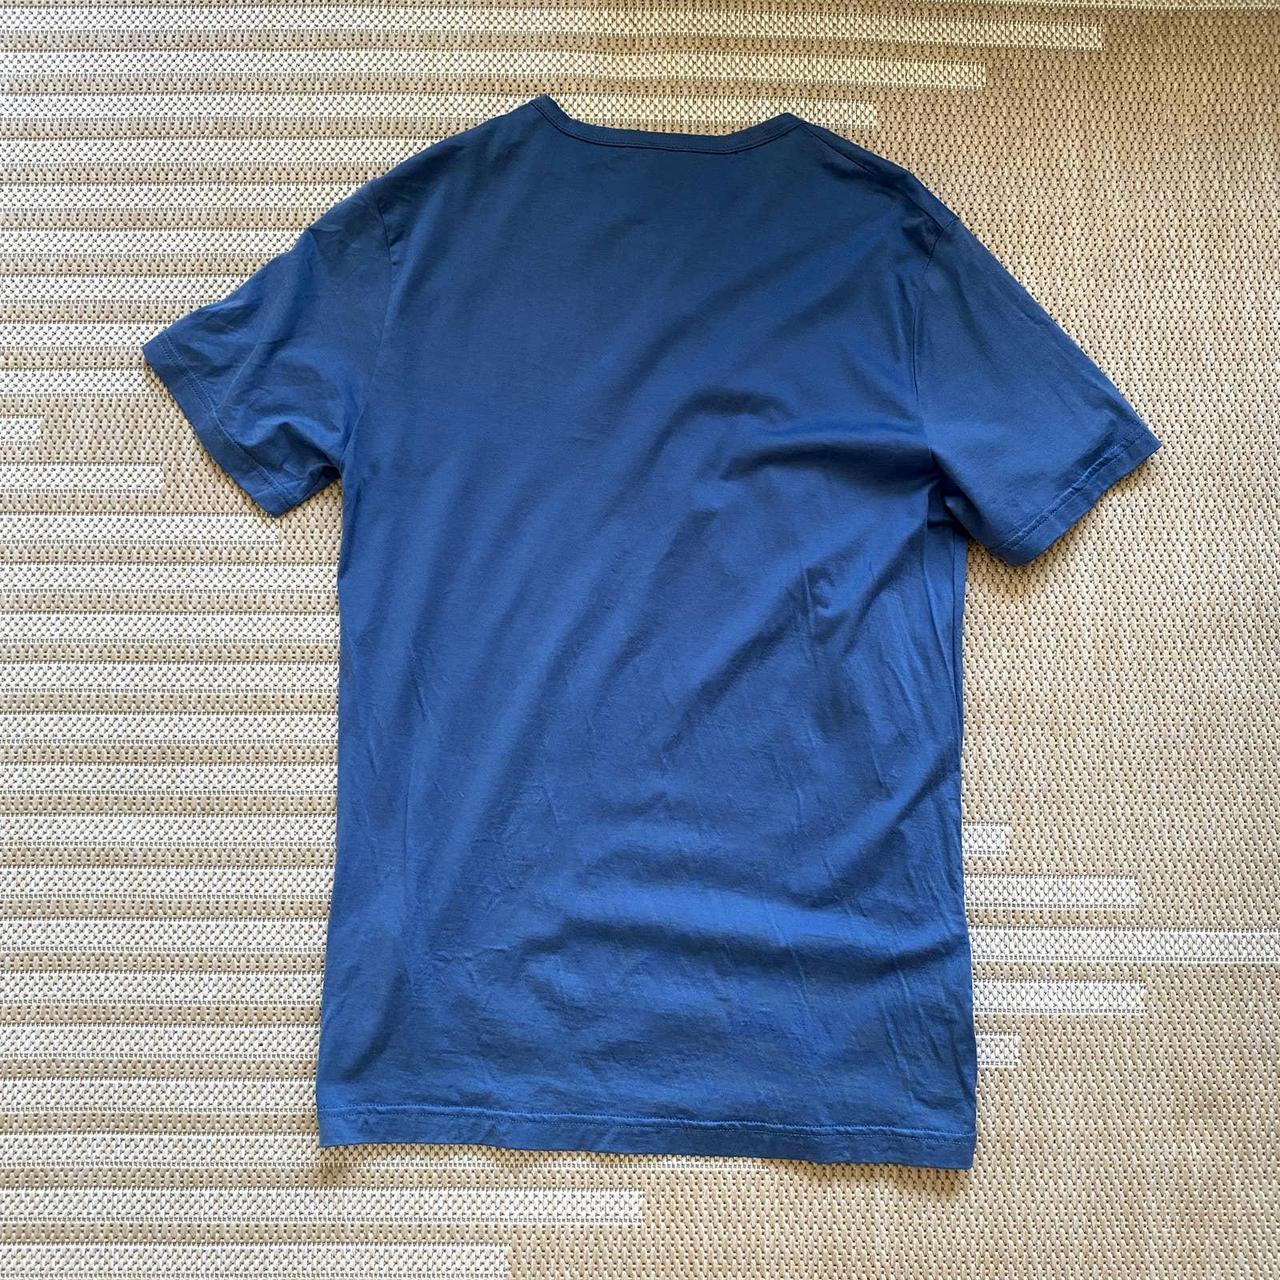 Product Image 2 - New without tags. Atlantic Blue